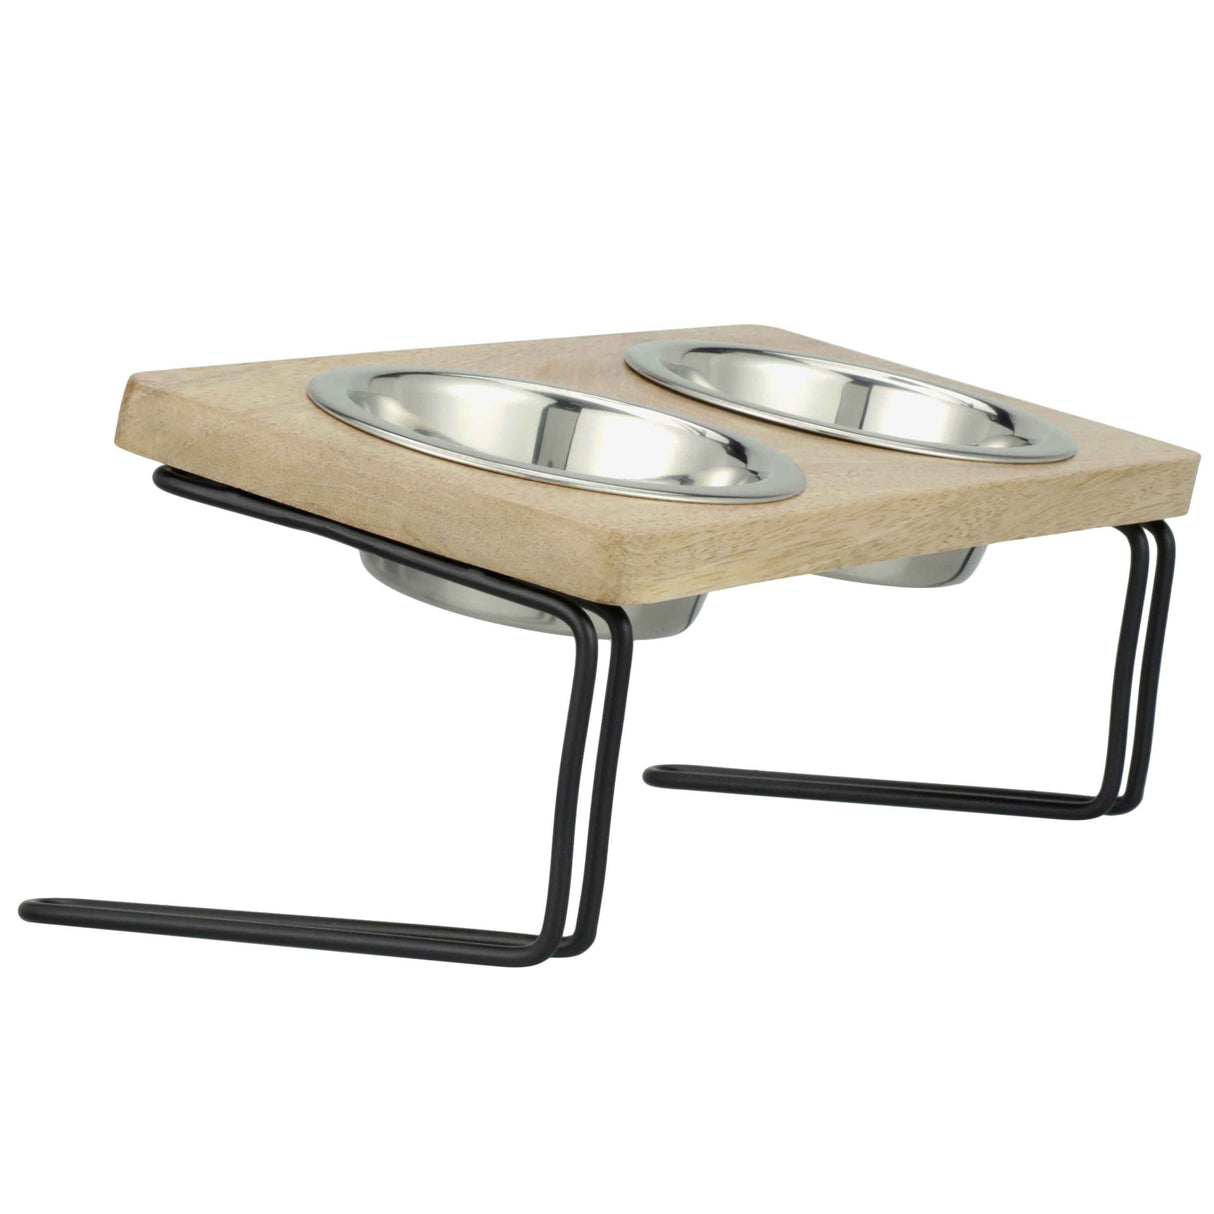 Elevated and angled feeder with stainless steel bowls